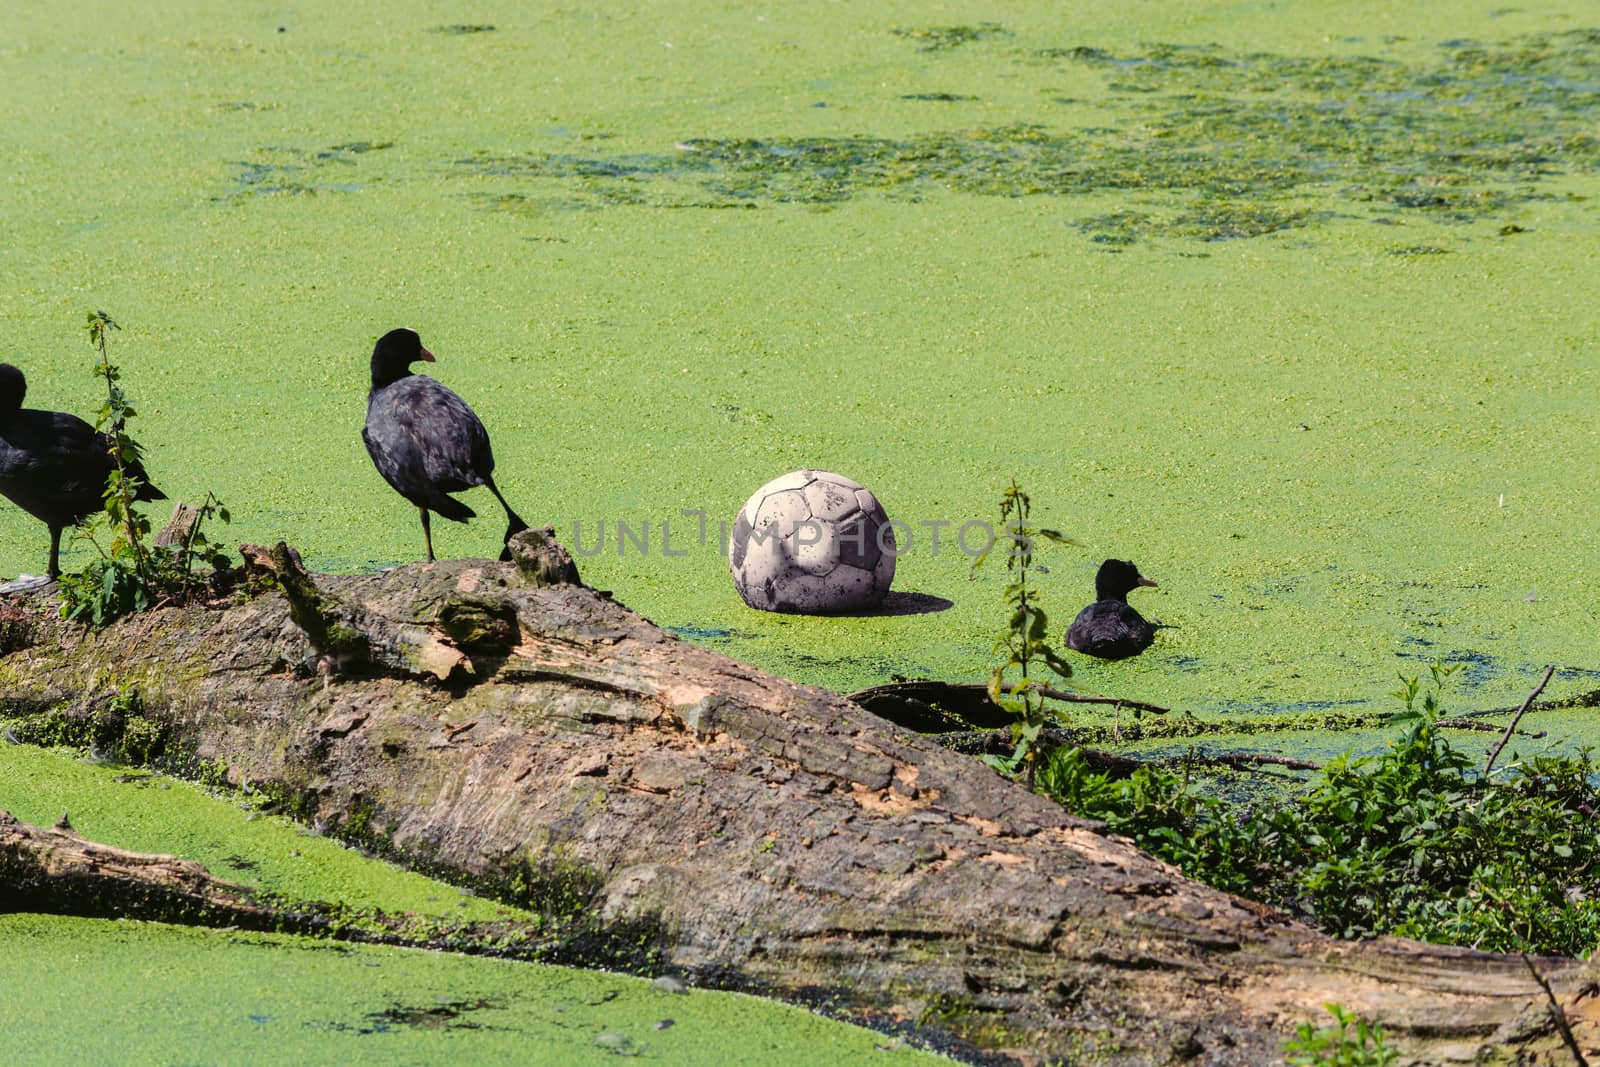 Ducks and a soccer ball in a pond with duckweed or waterlins.